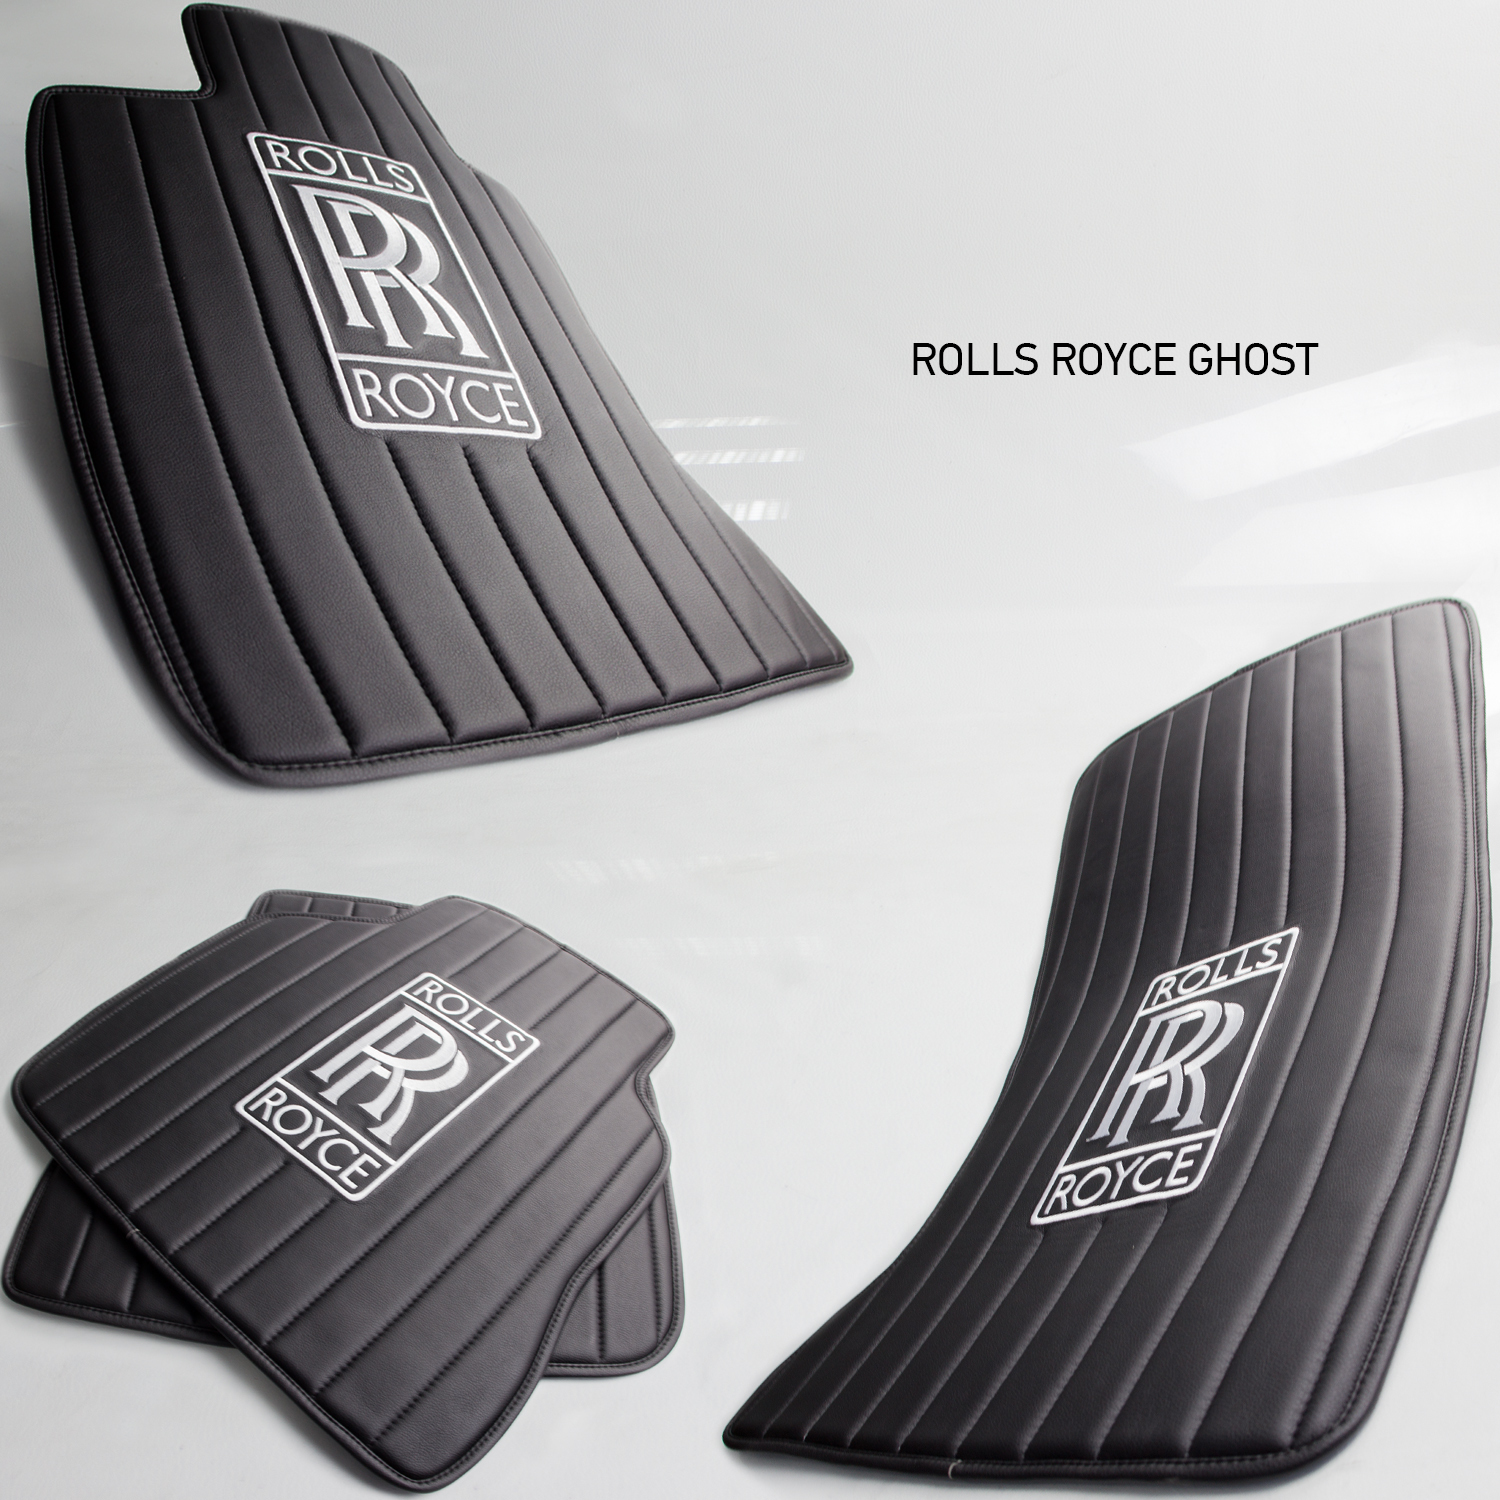 images-products-1-648-232989320-ROLLS_ROYCE_GHOST.jpg